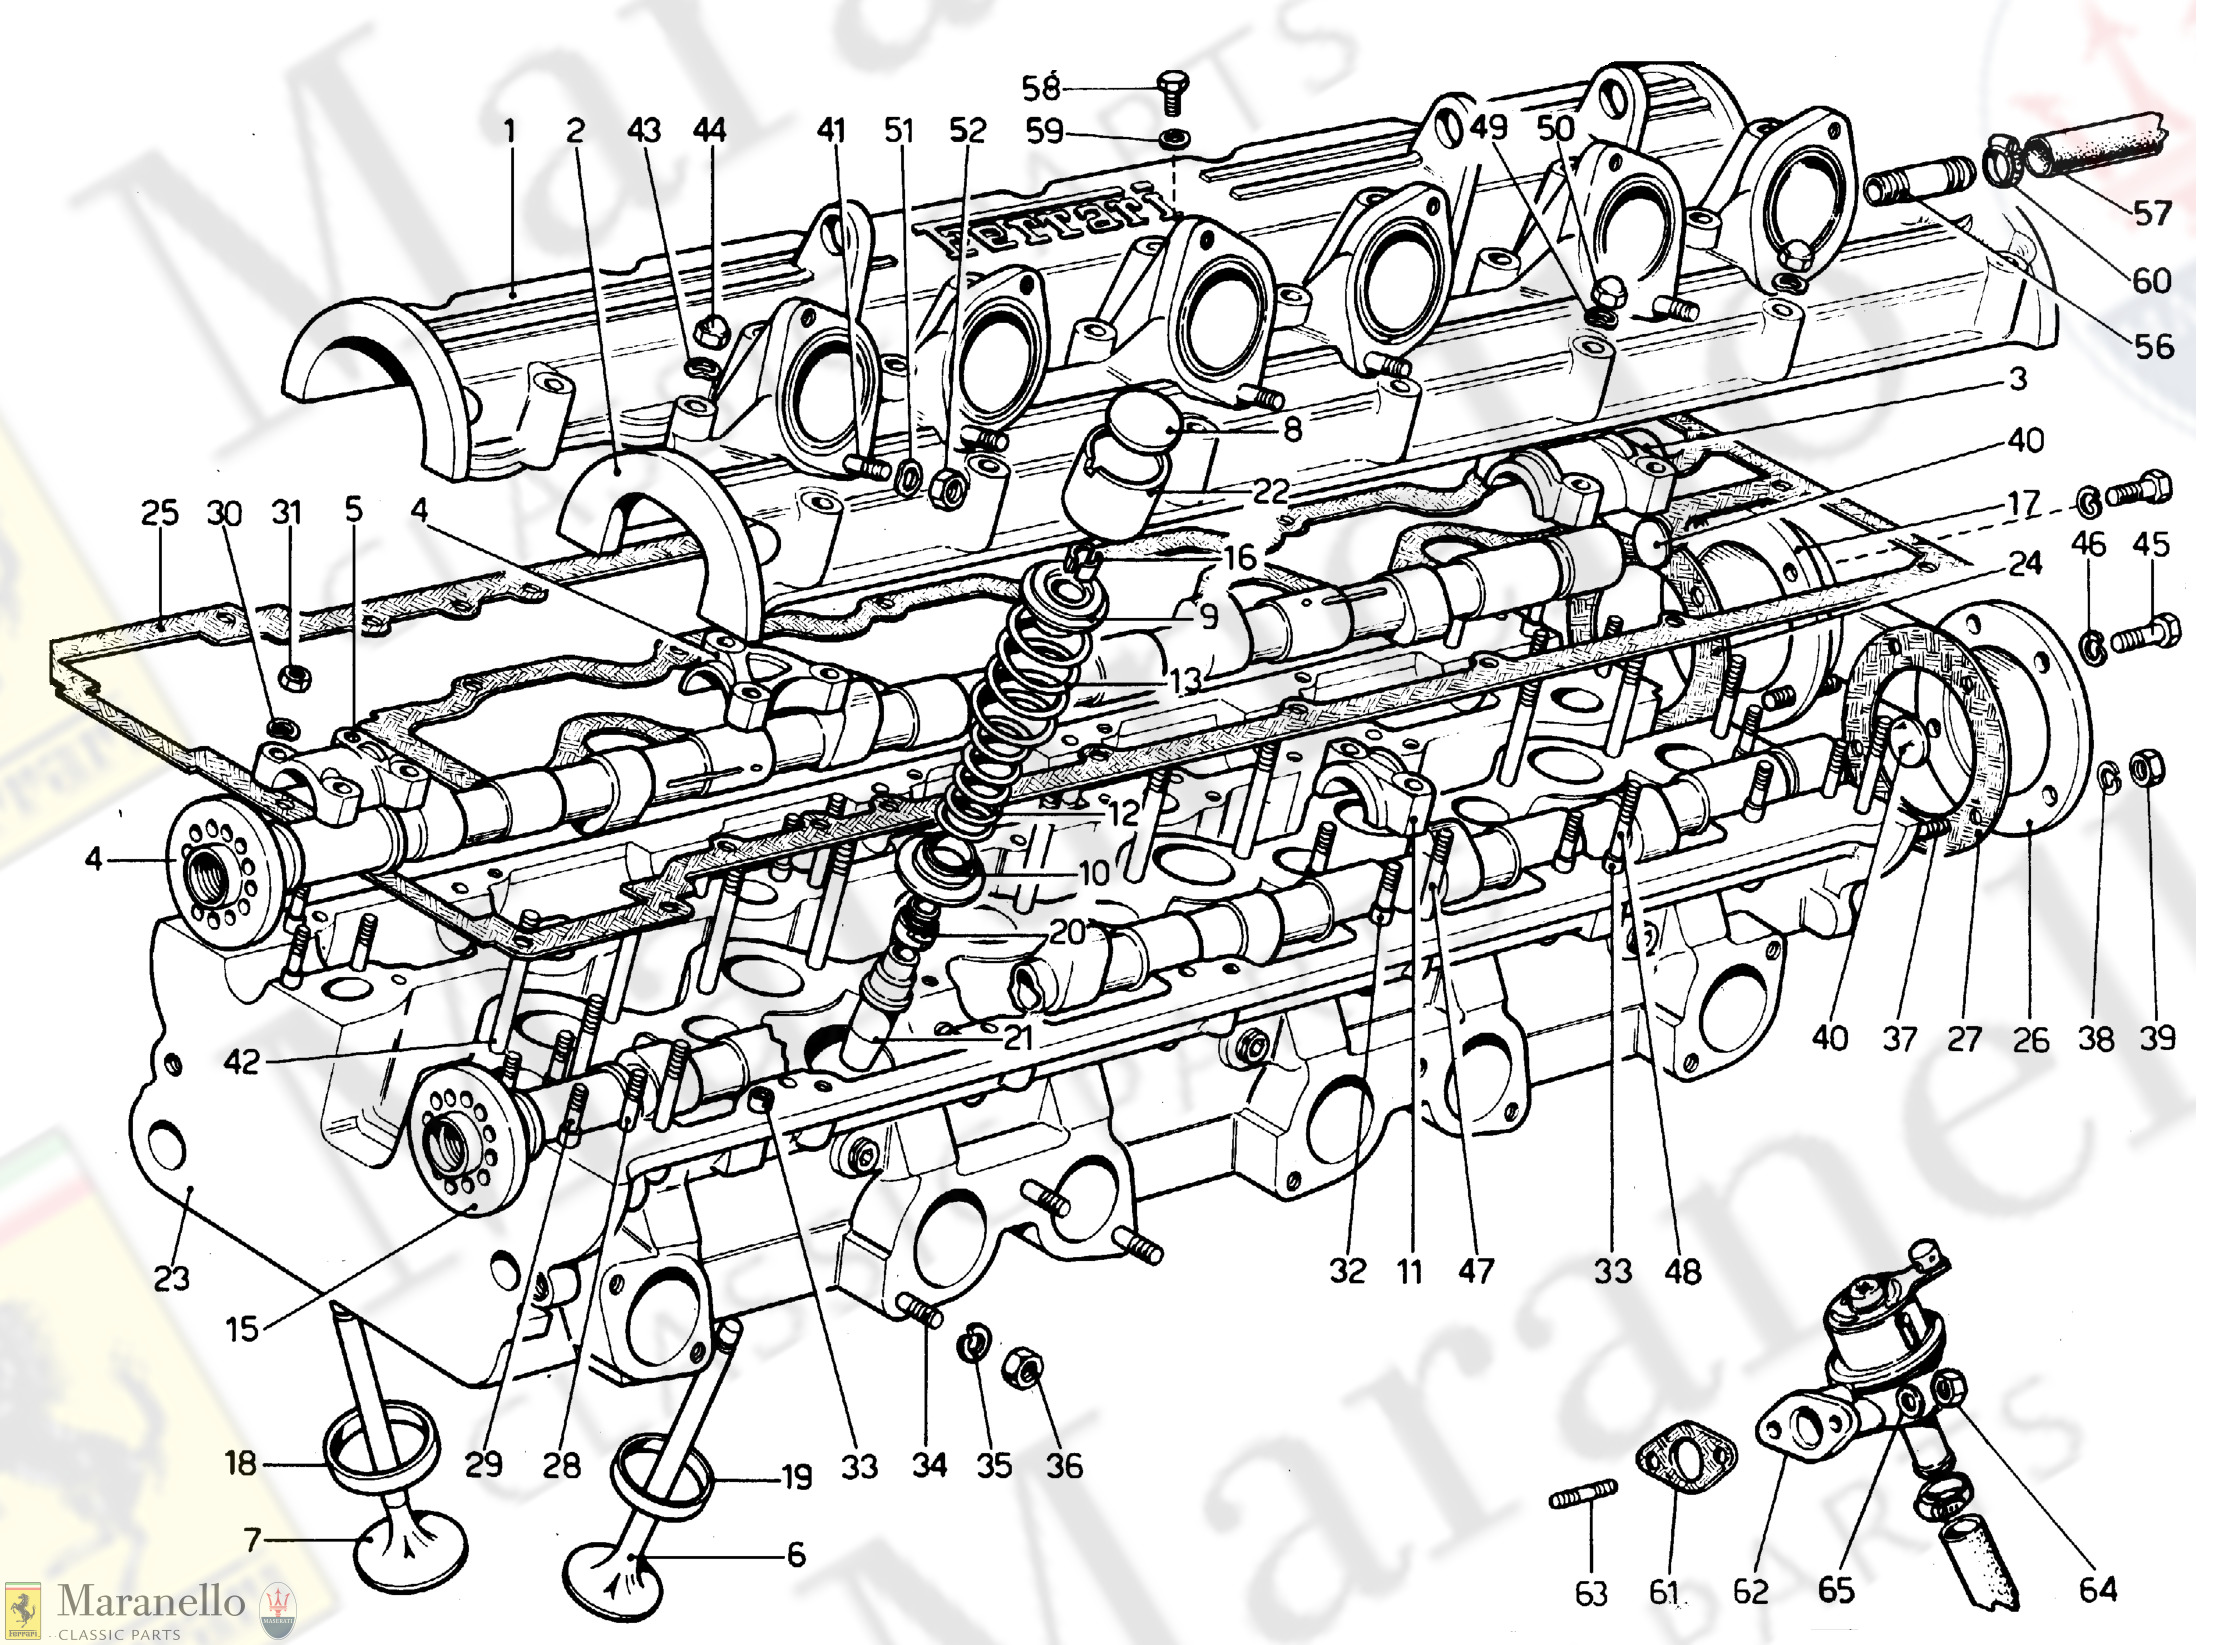 005A - Cylinder Head Left - Revision Oct 1972 